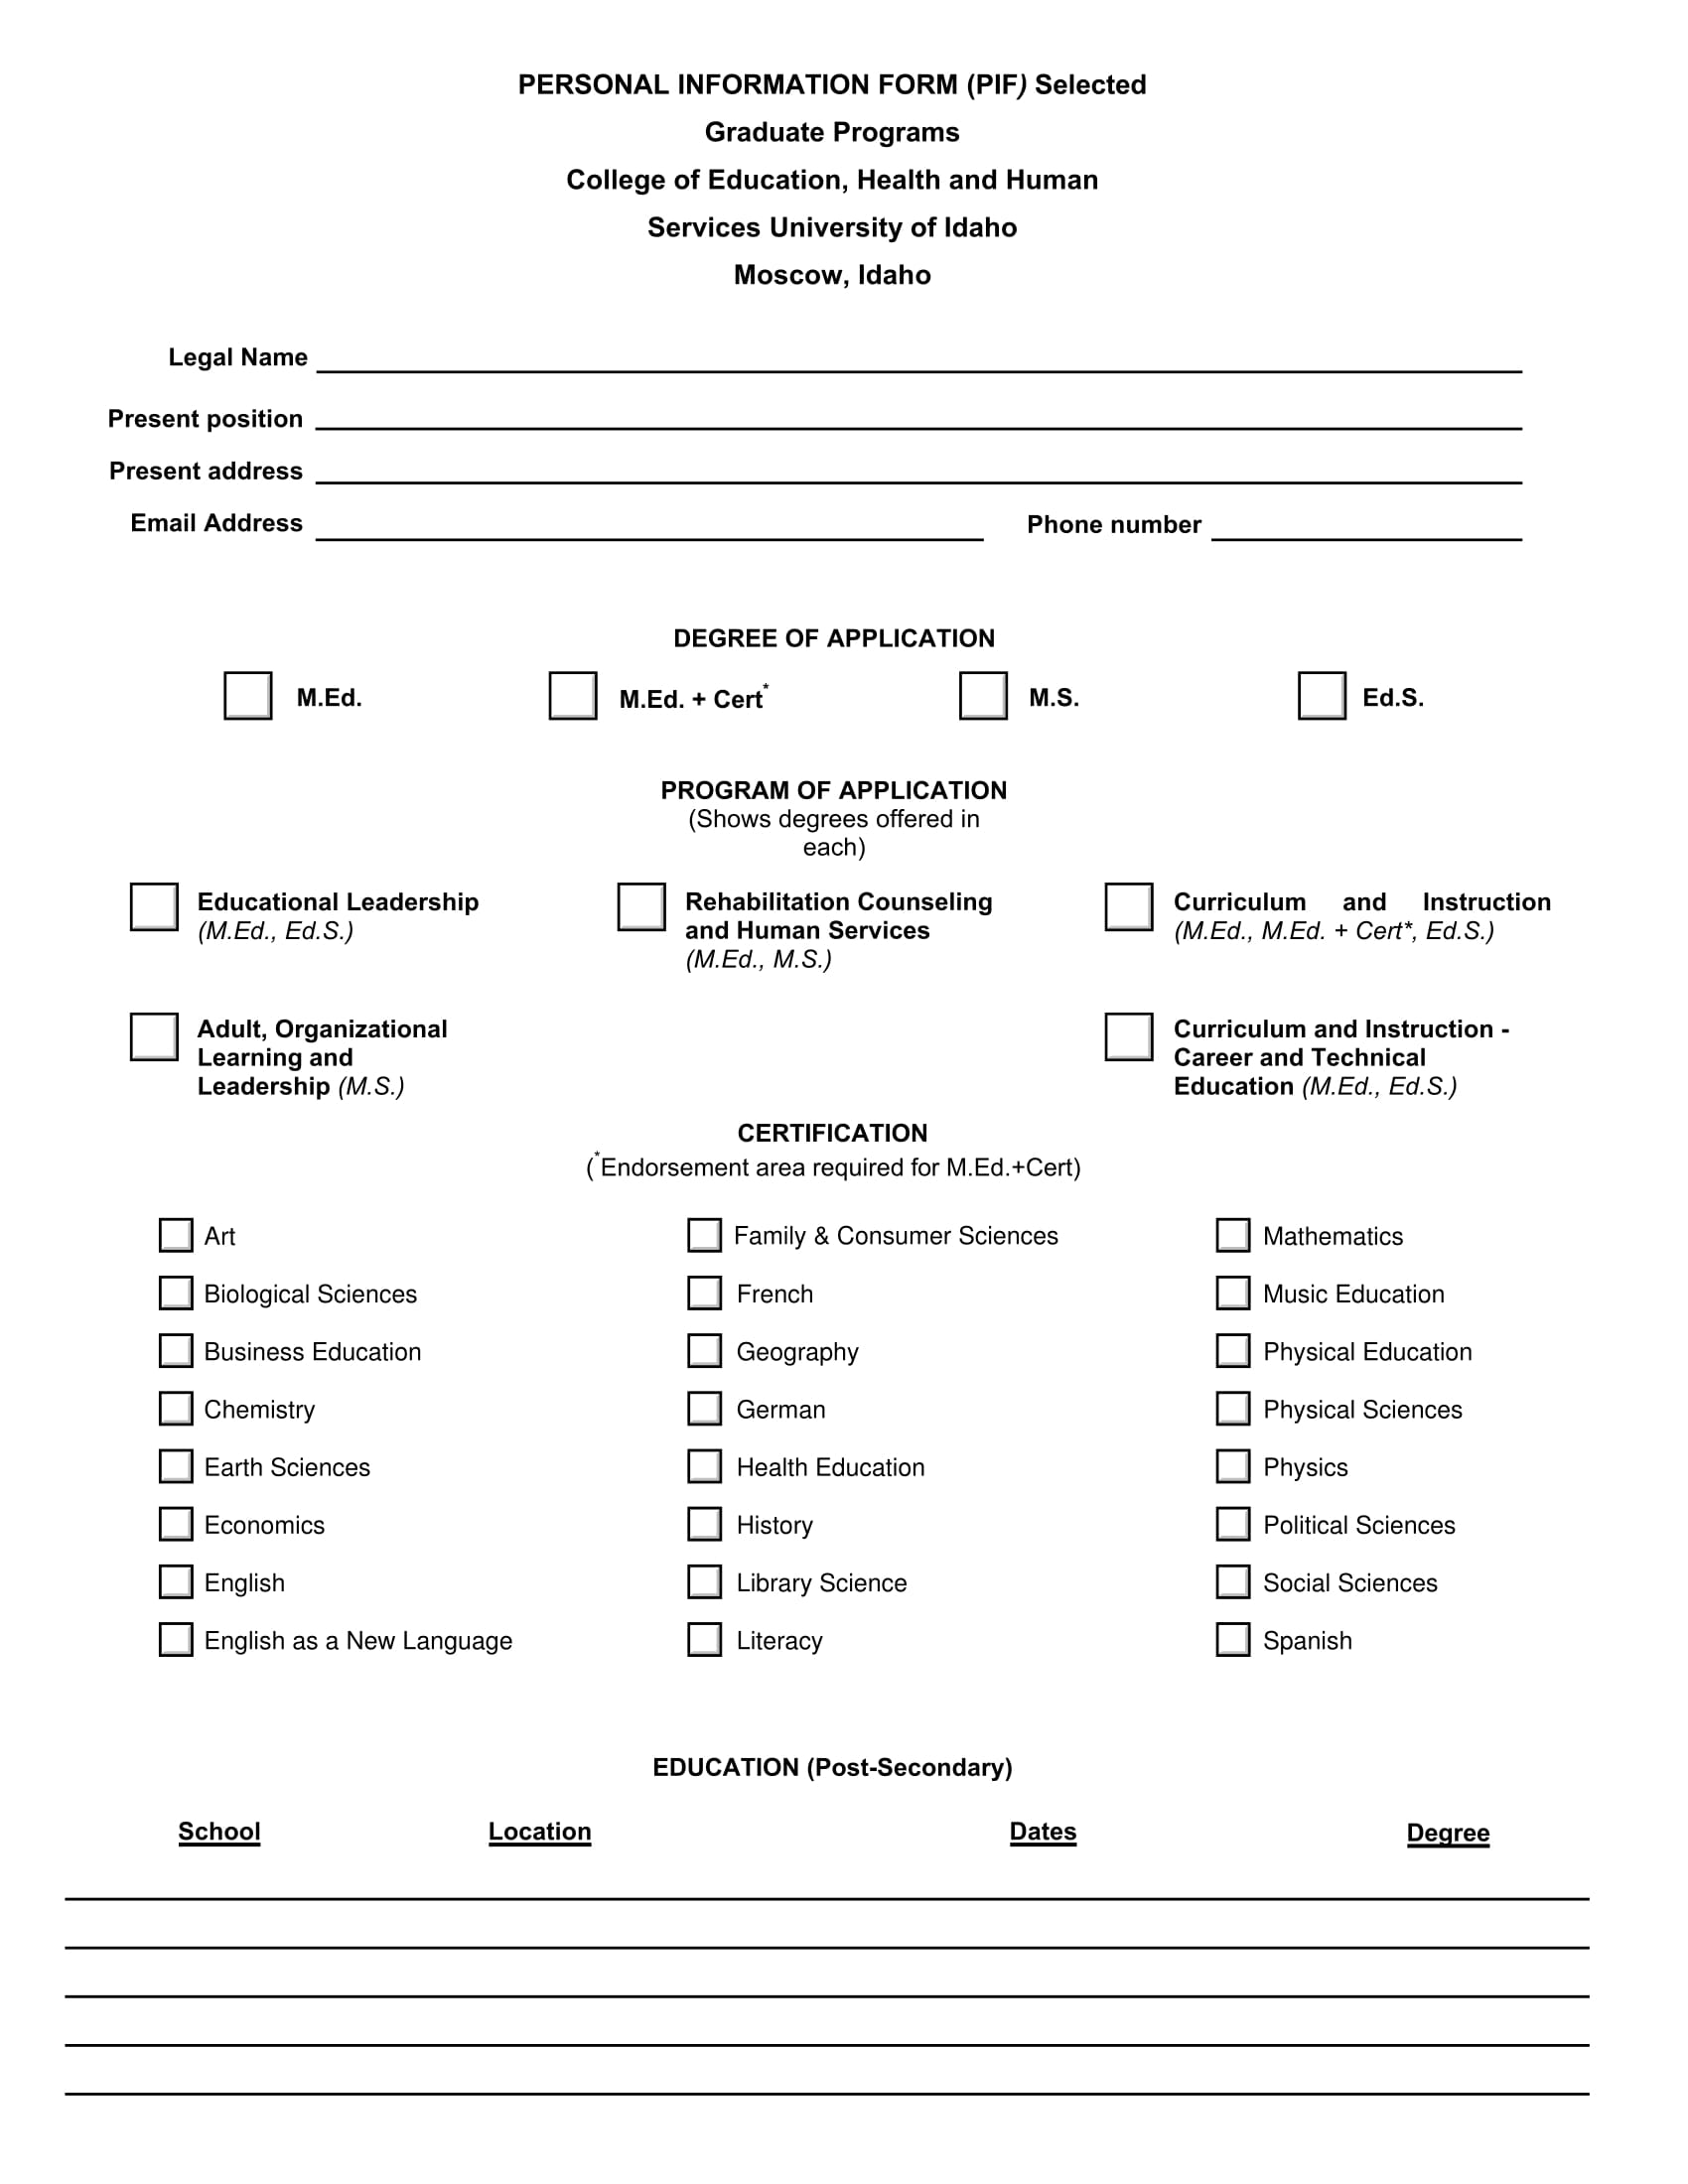 personal information form for education 1